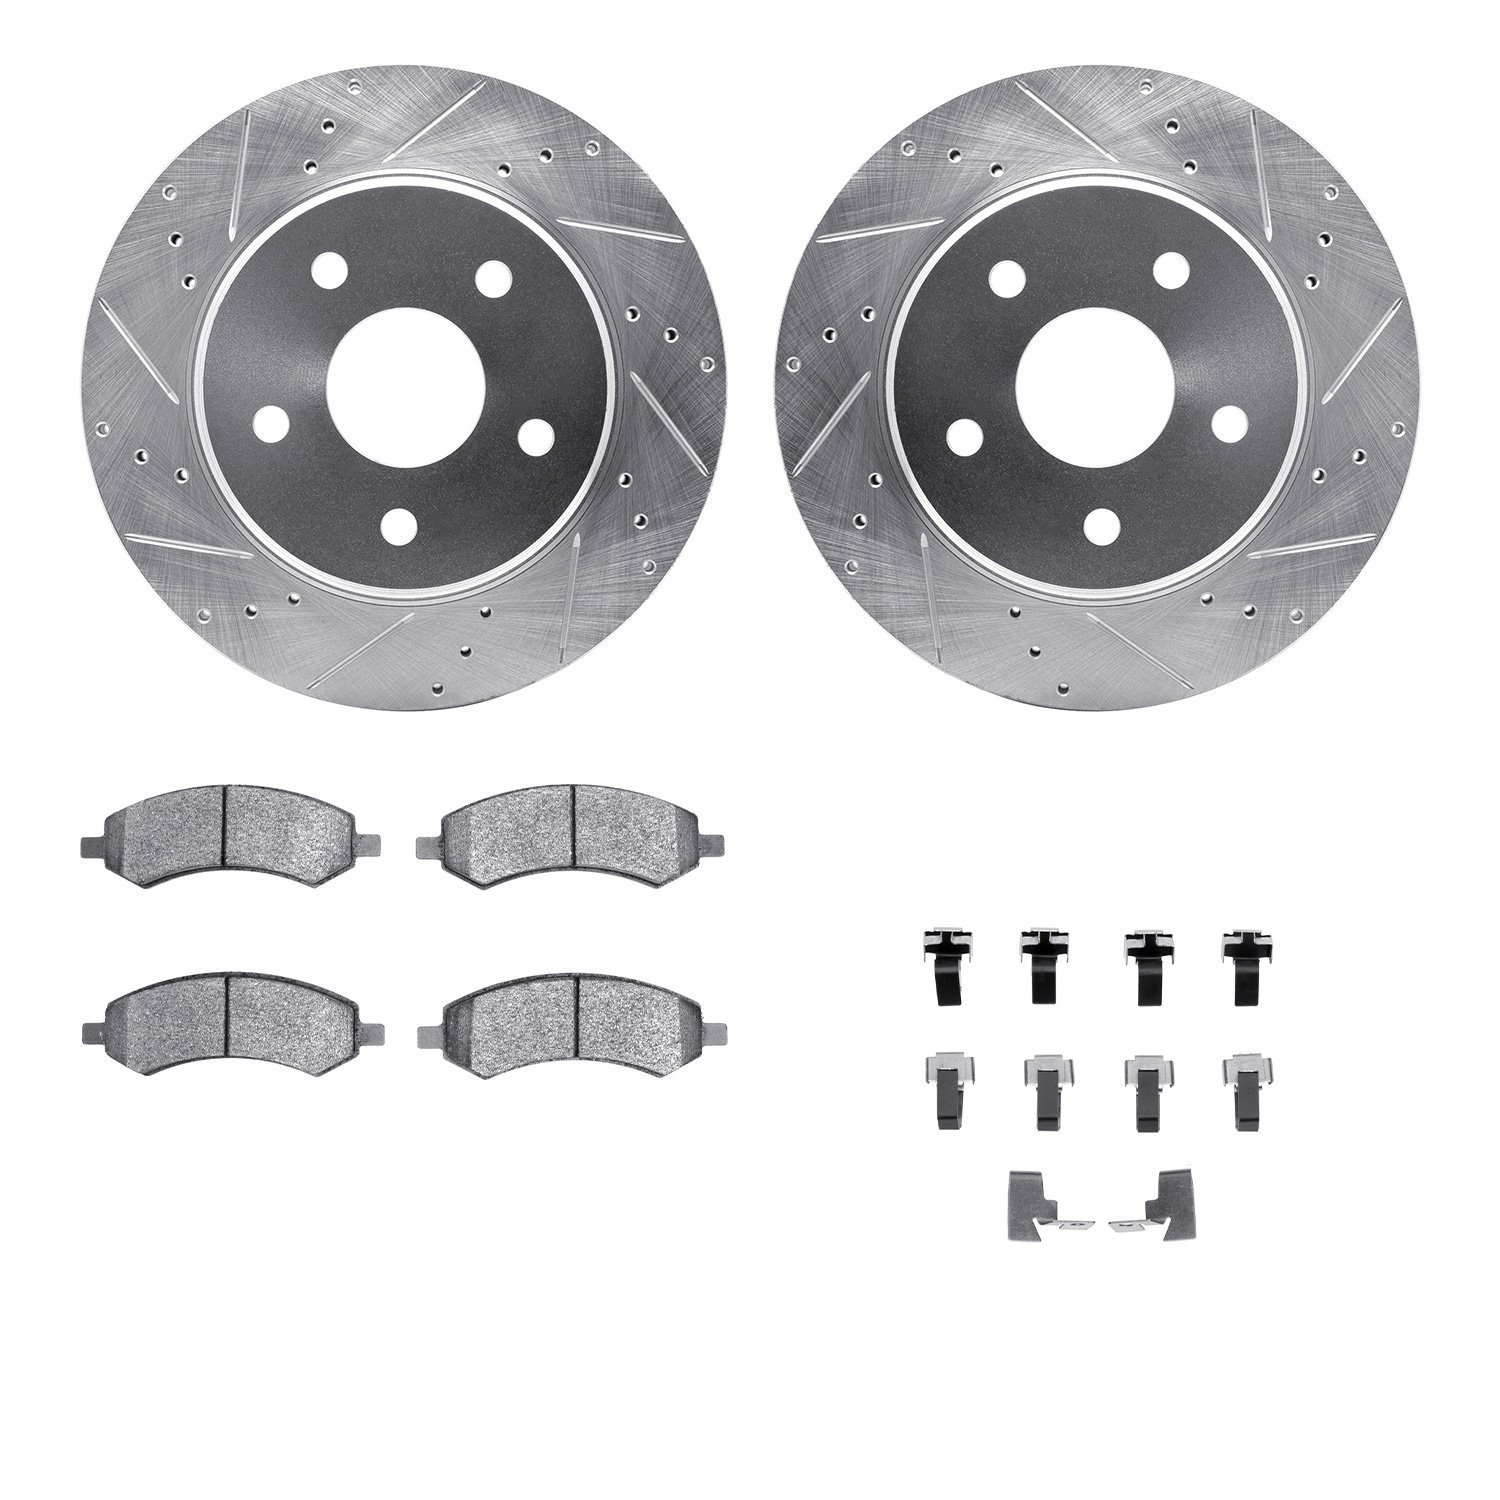 7412-42013 Drilled/Slotted Brake Rotors with Ultimate-Duty Brake Pads Kit & Hardware [Silver], 2008-2012 Mopar, Position: Front